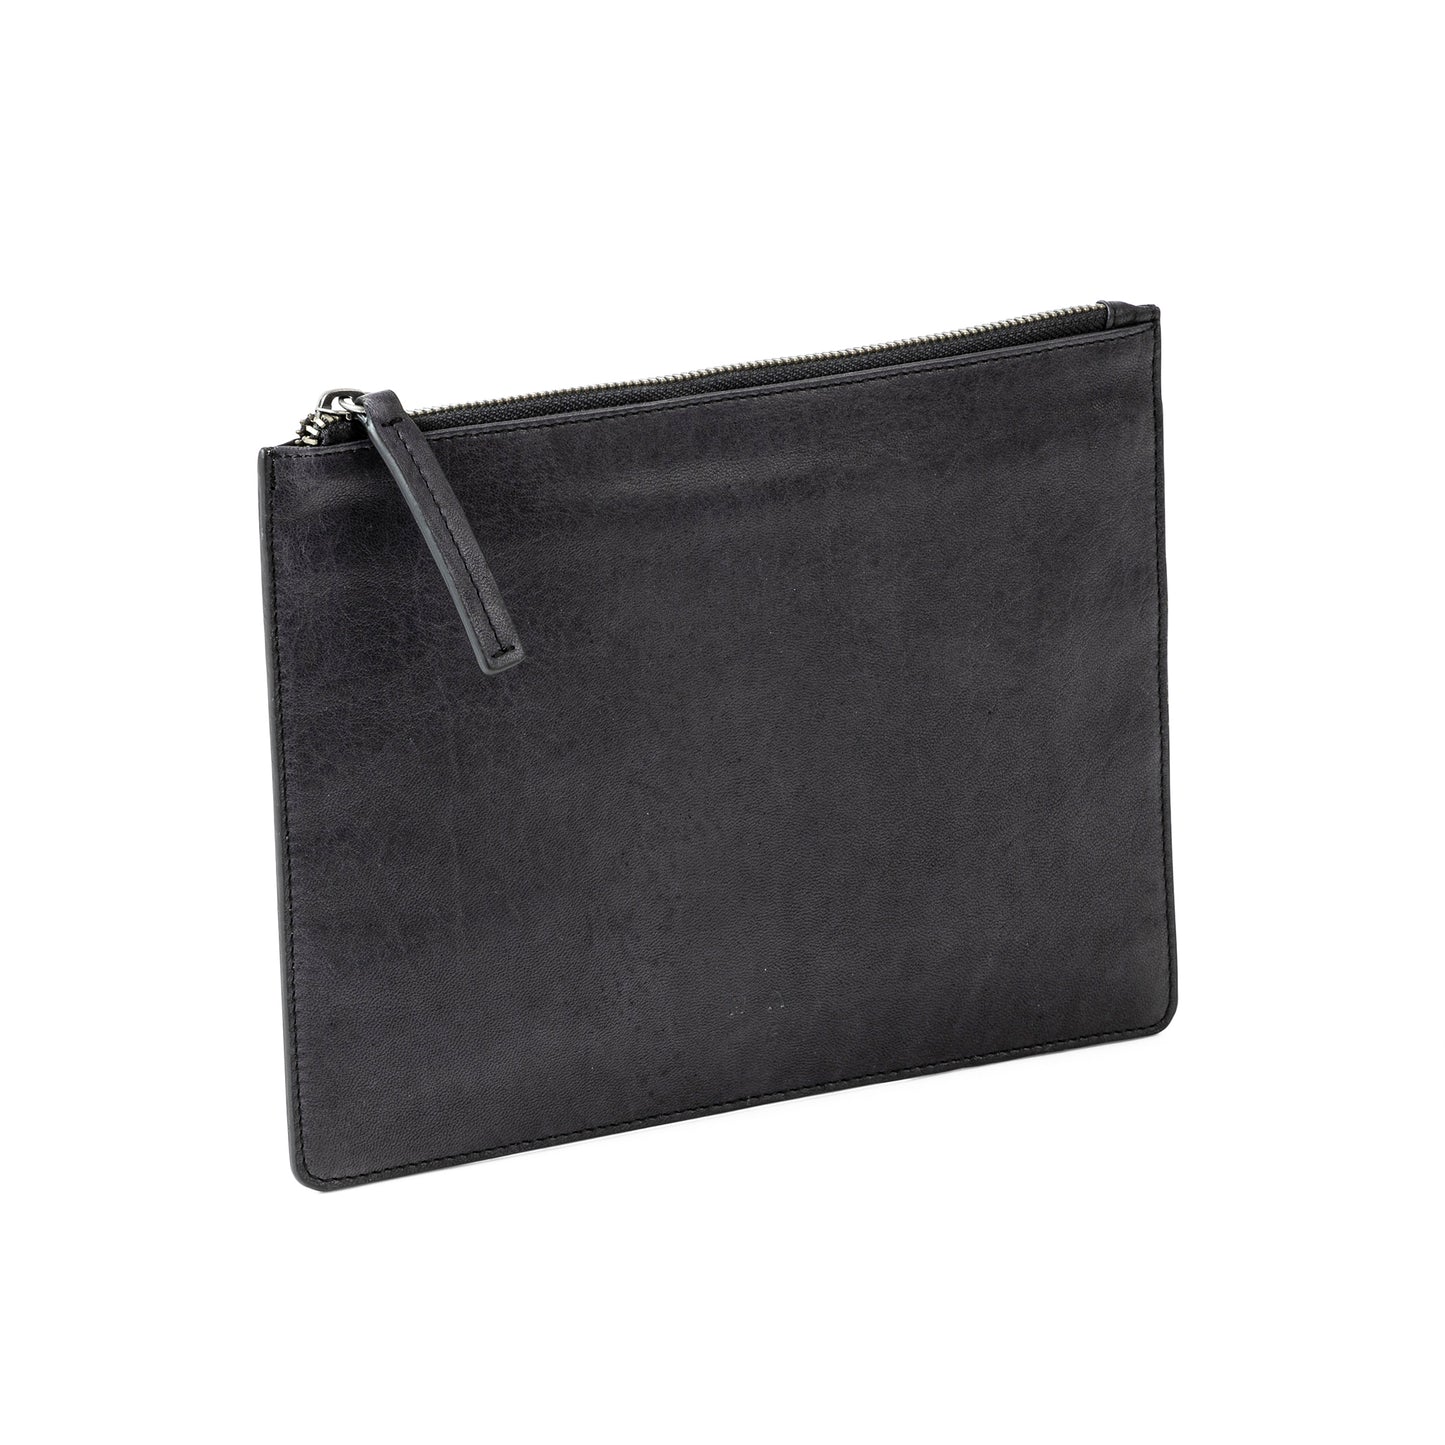 SIK Small Pouch Black